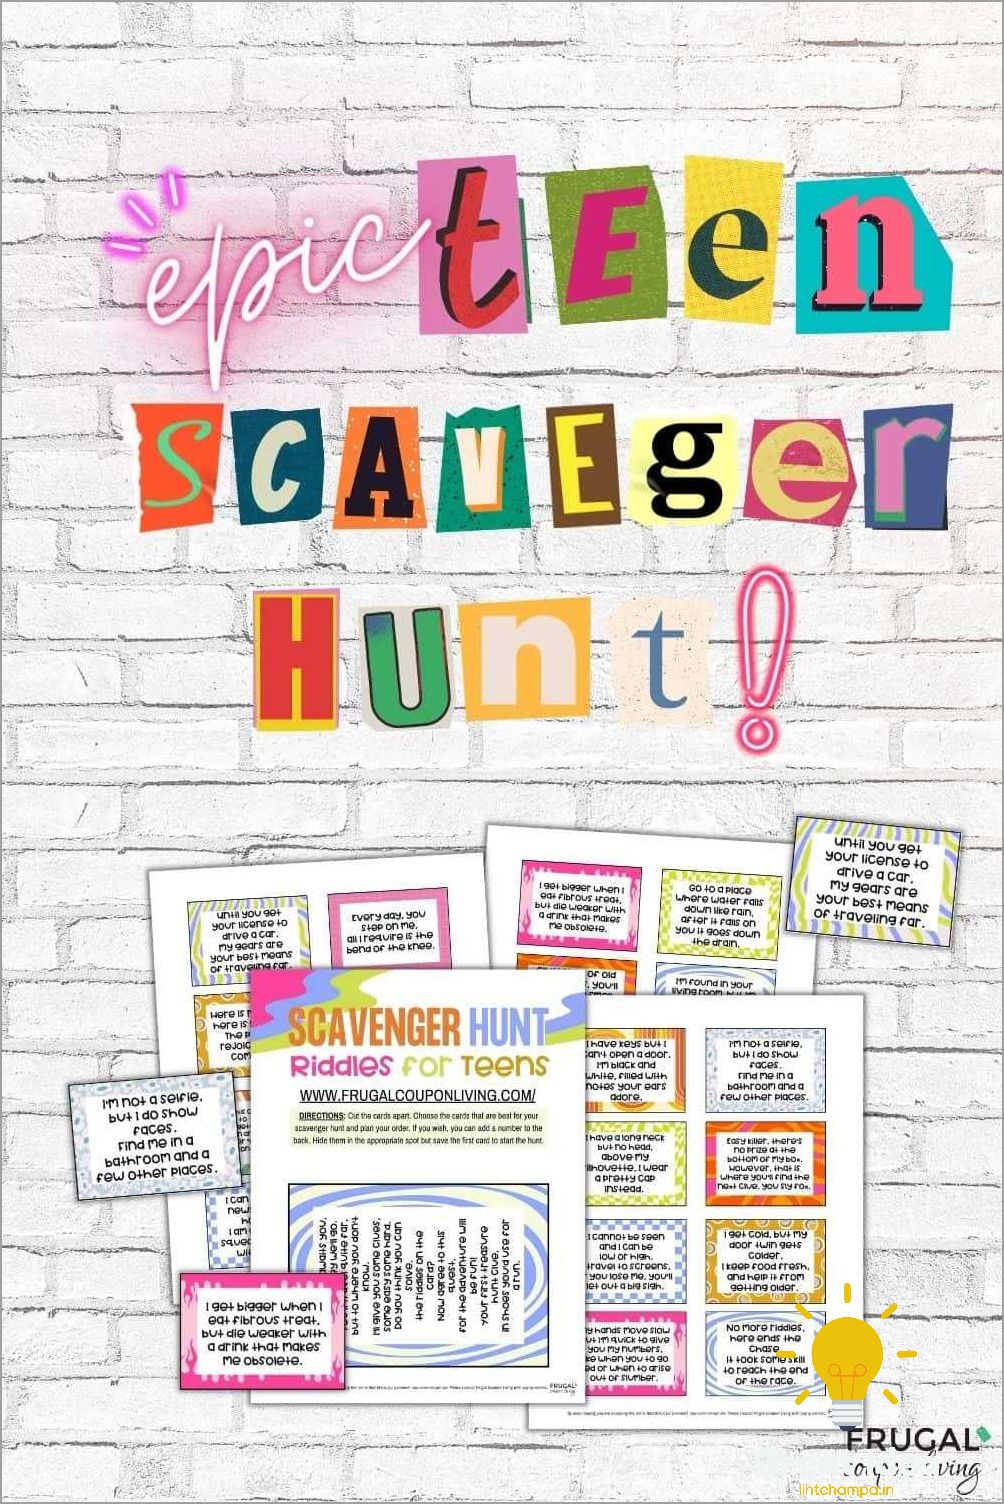 Exciting Scavenger Hunt Ideas for Teens - Fun Activities for Adventure Seekers